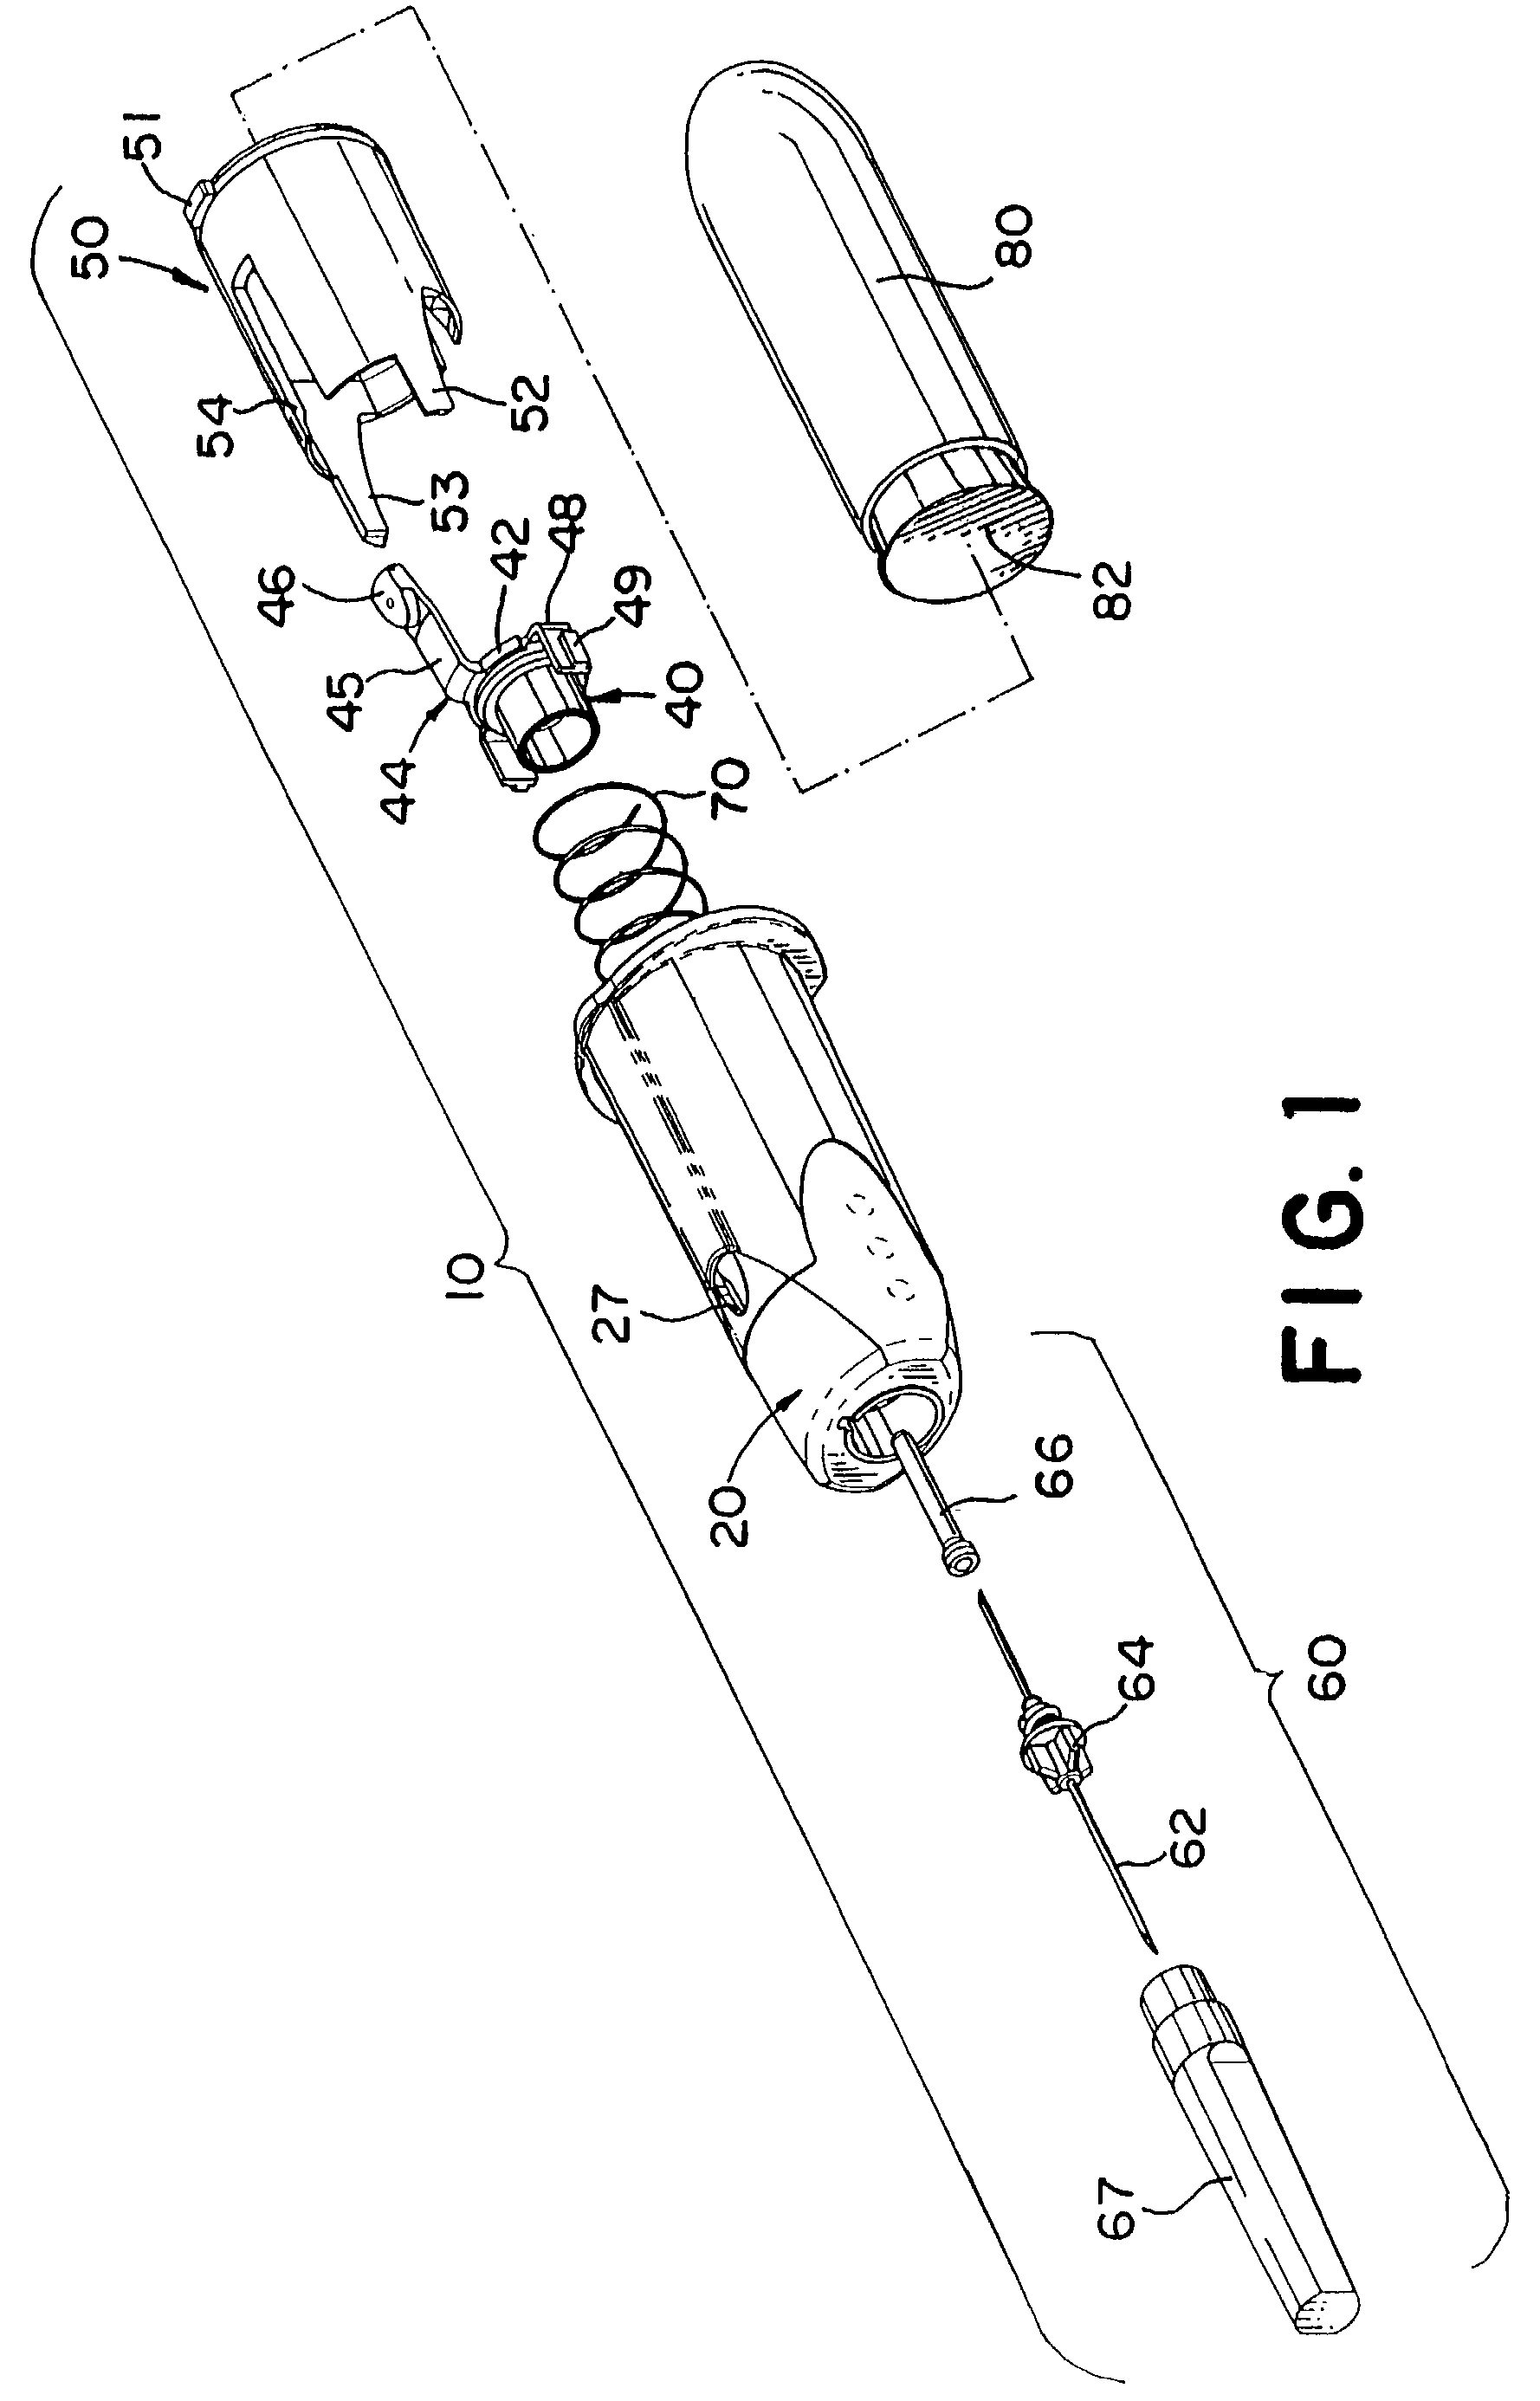 Fluid collection device having tilting retractable needle